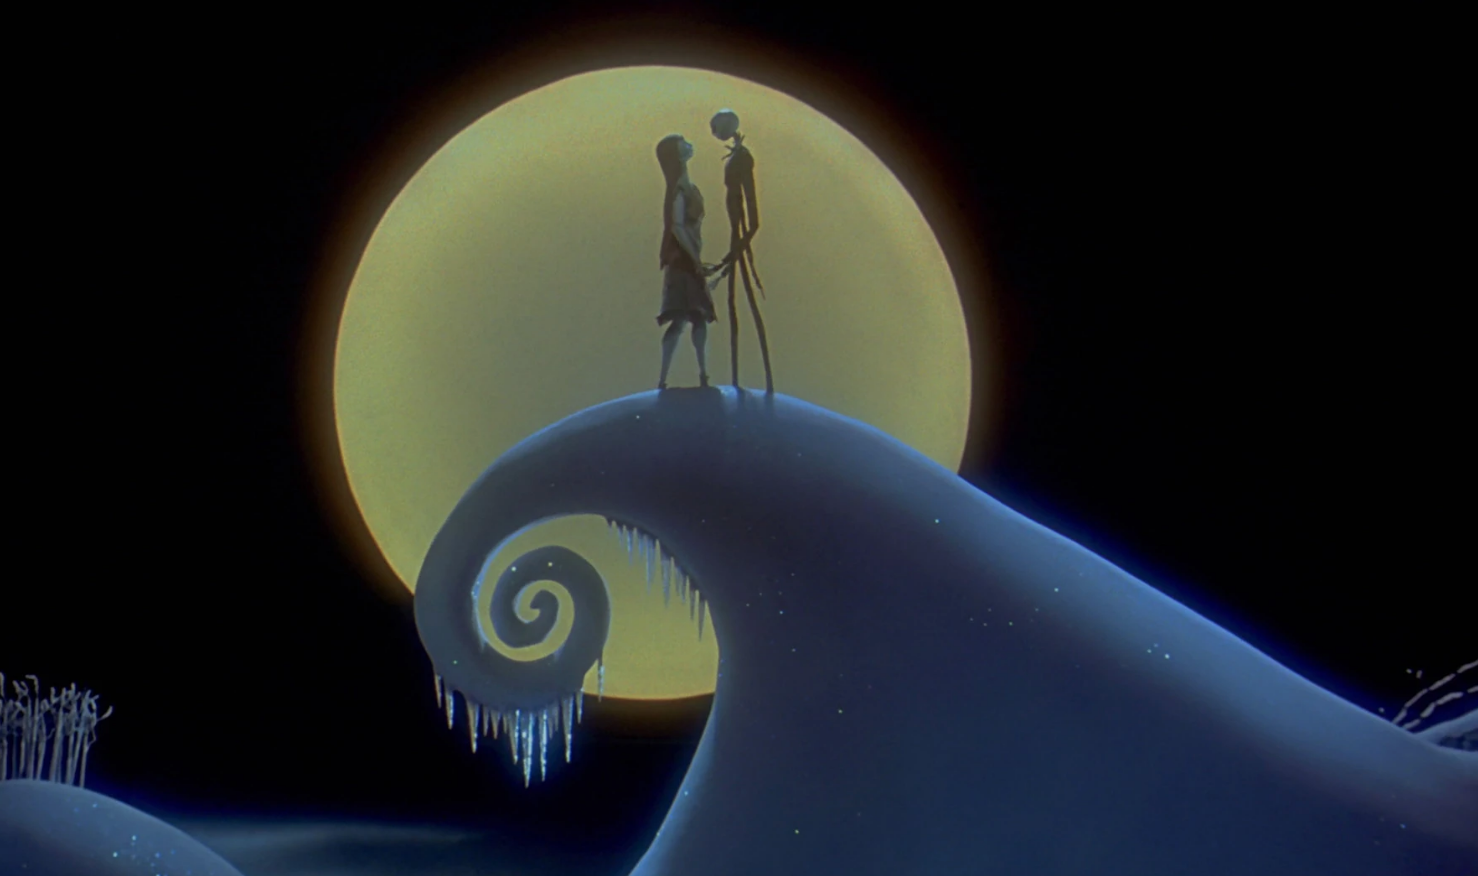 scene from the film where jack and sally are on the snowy cliff